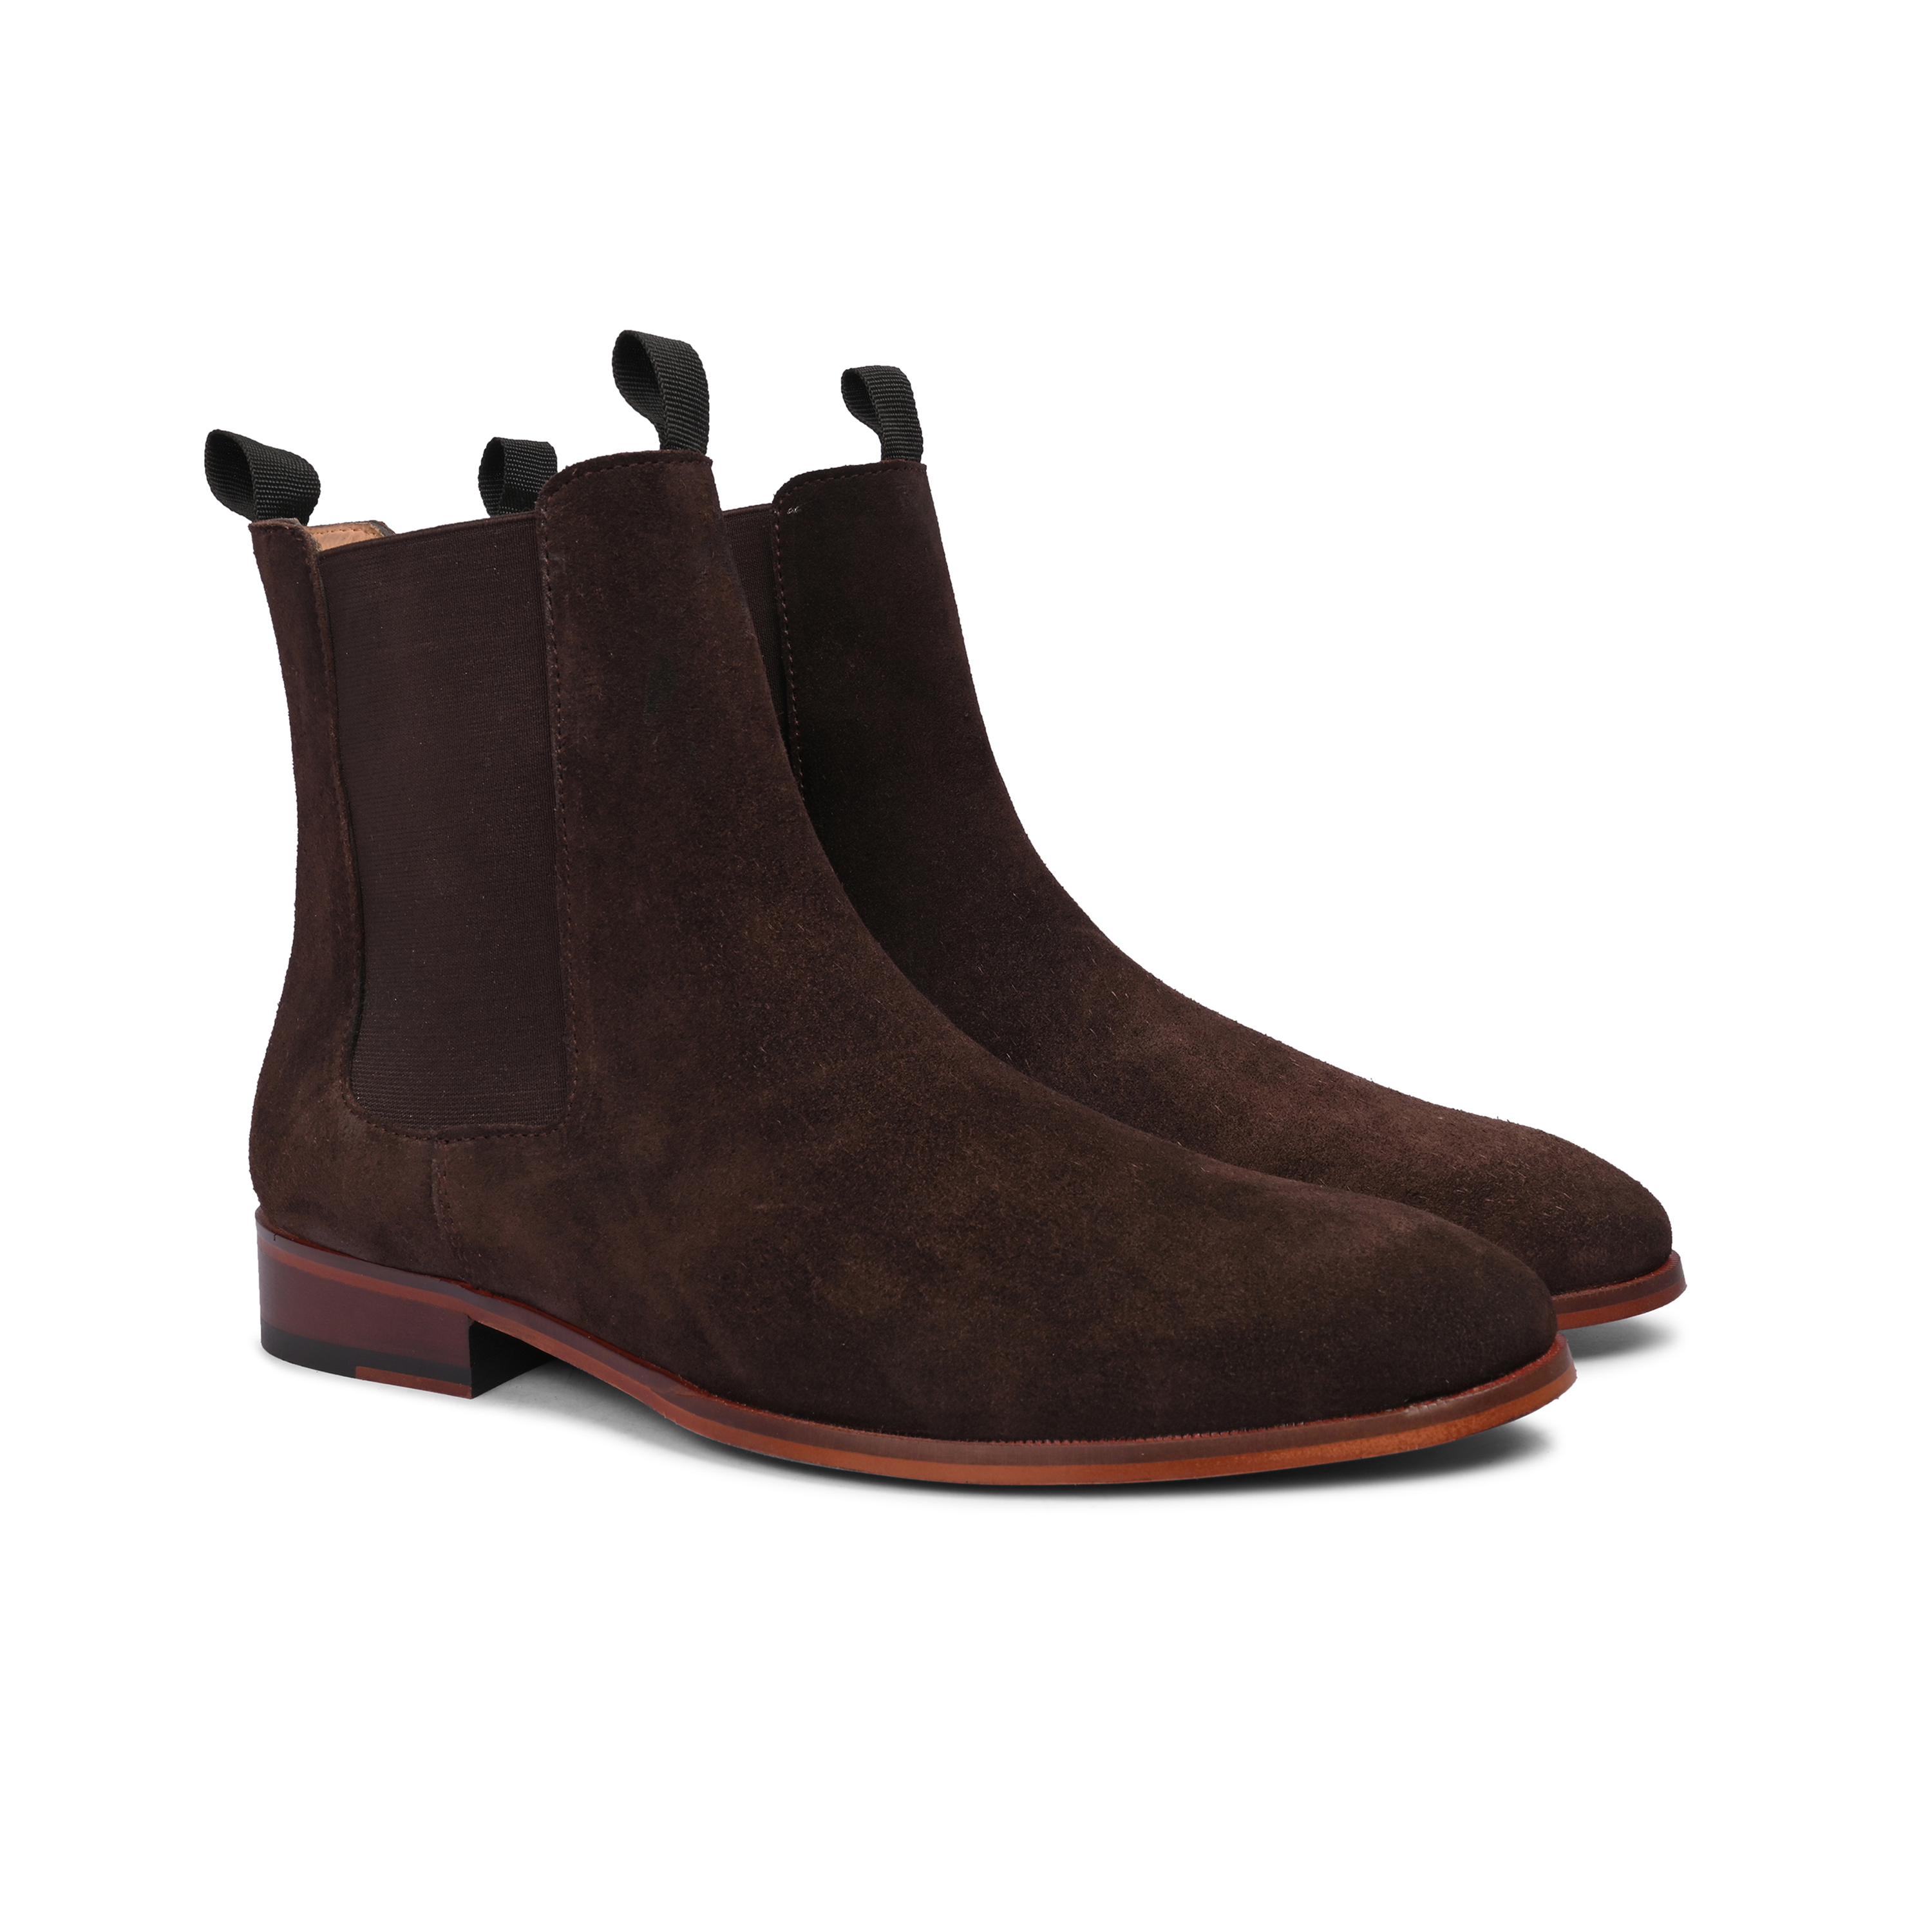 Tranquil Twilight Chelsea Boots